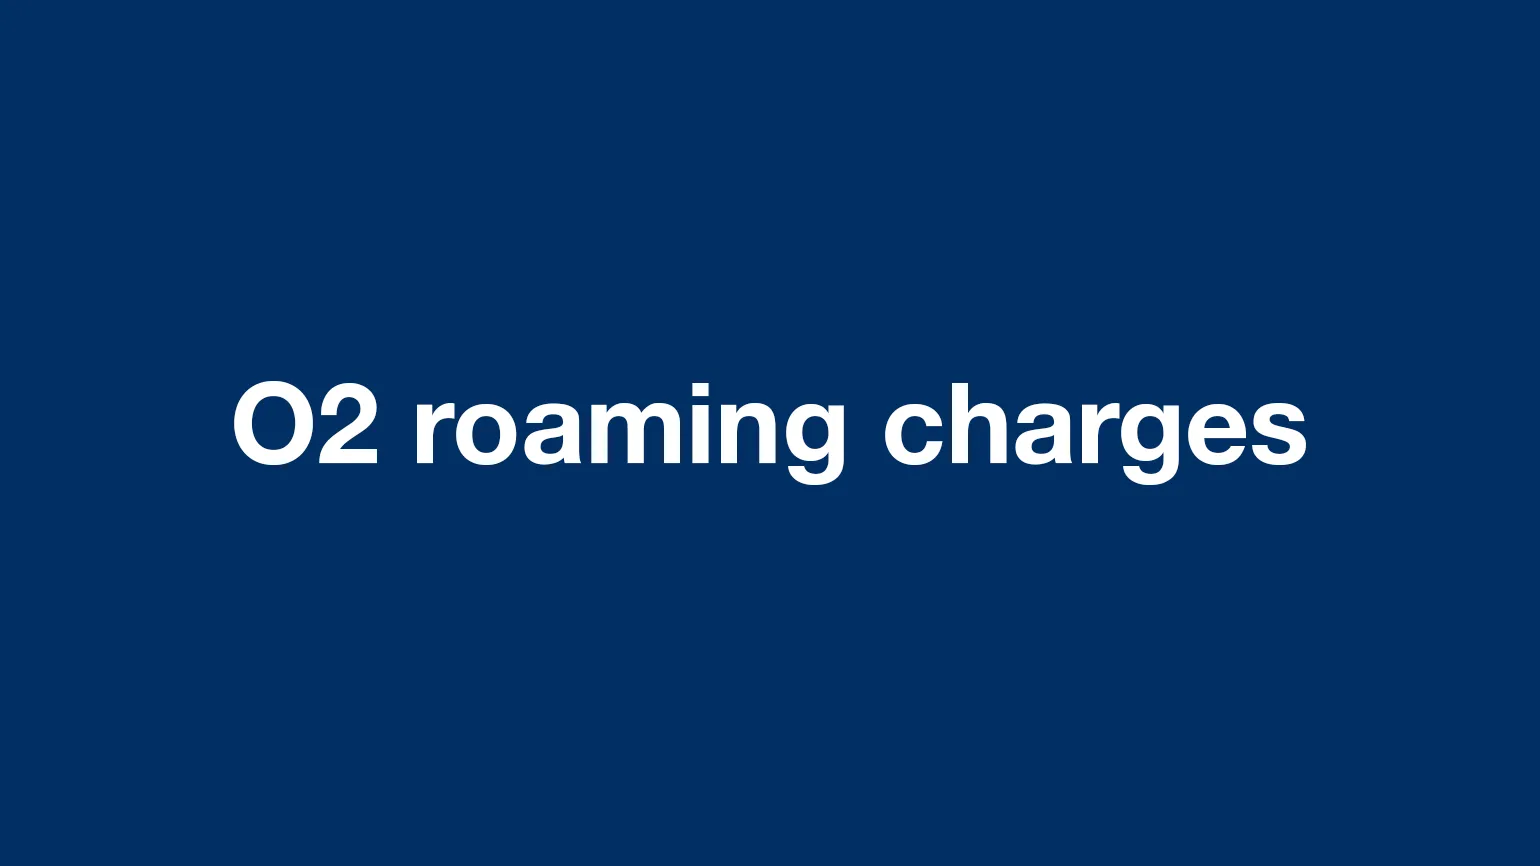 Will I be charged if I exceed my allowance when roaming with O2?